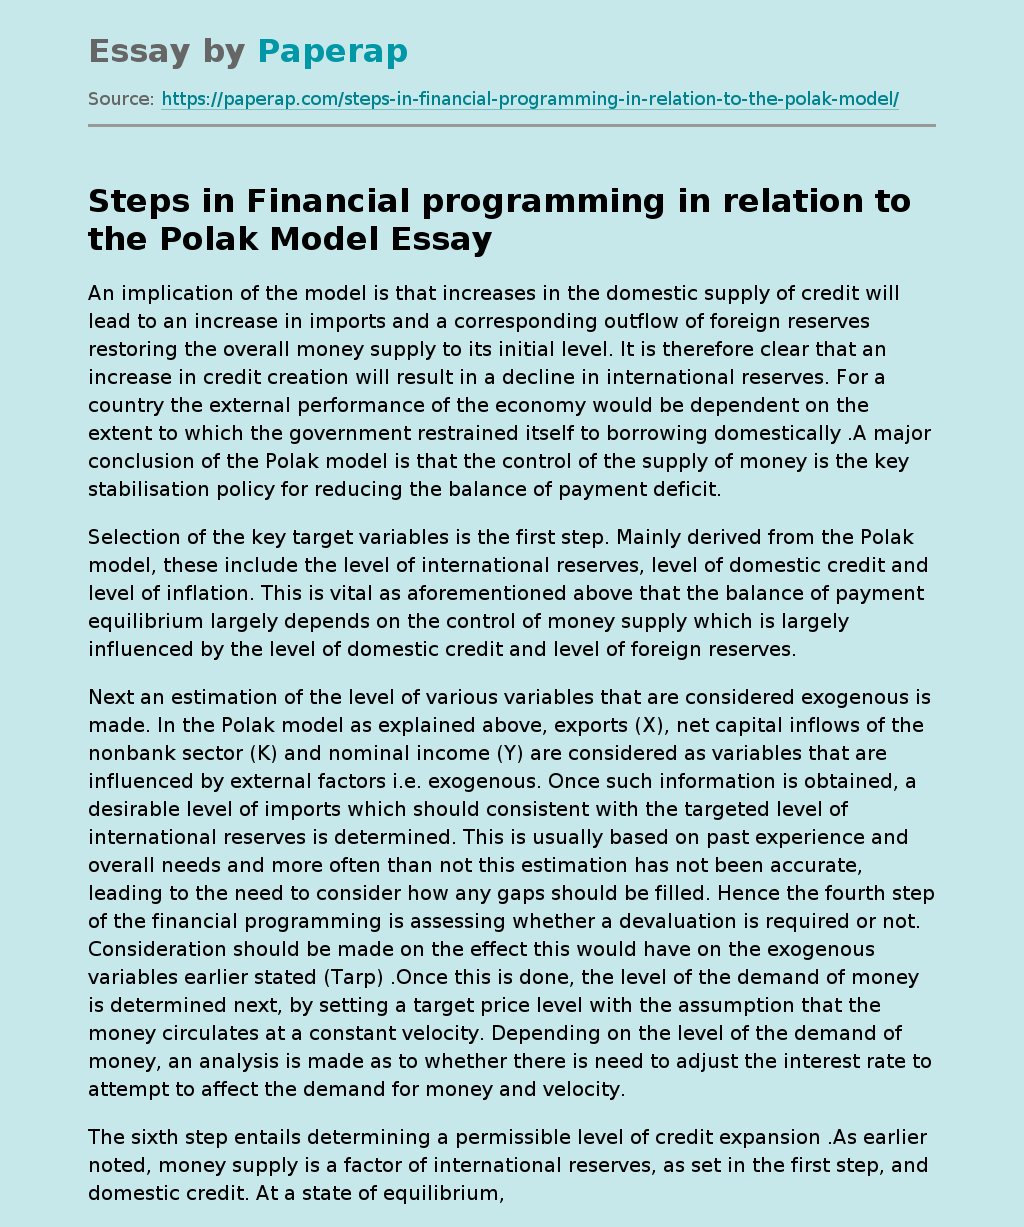 Steps in Financial programming in relation to the Polak Model